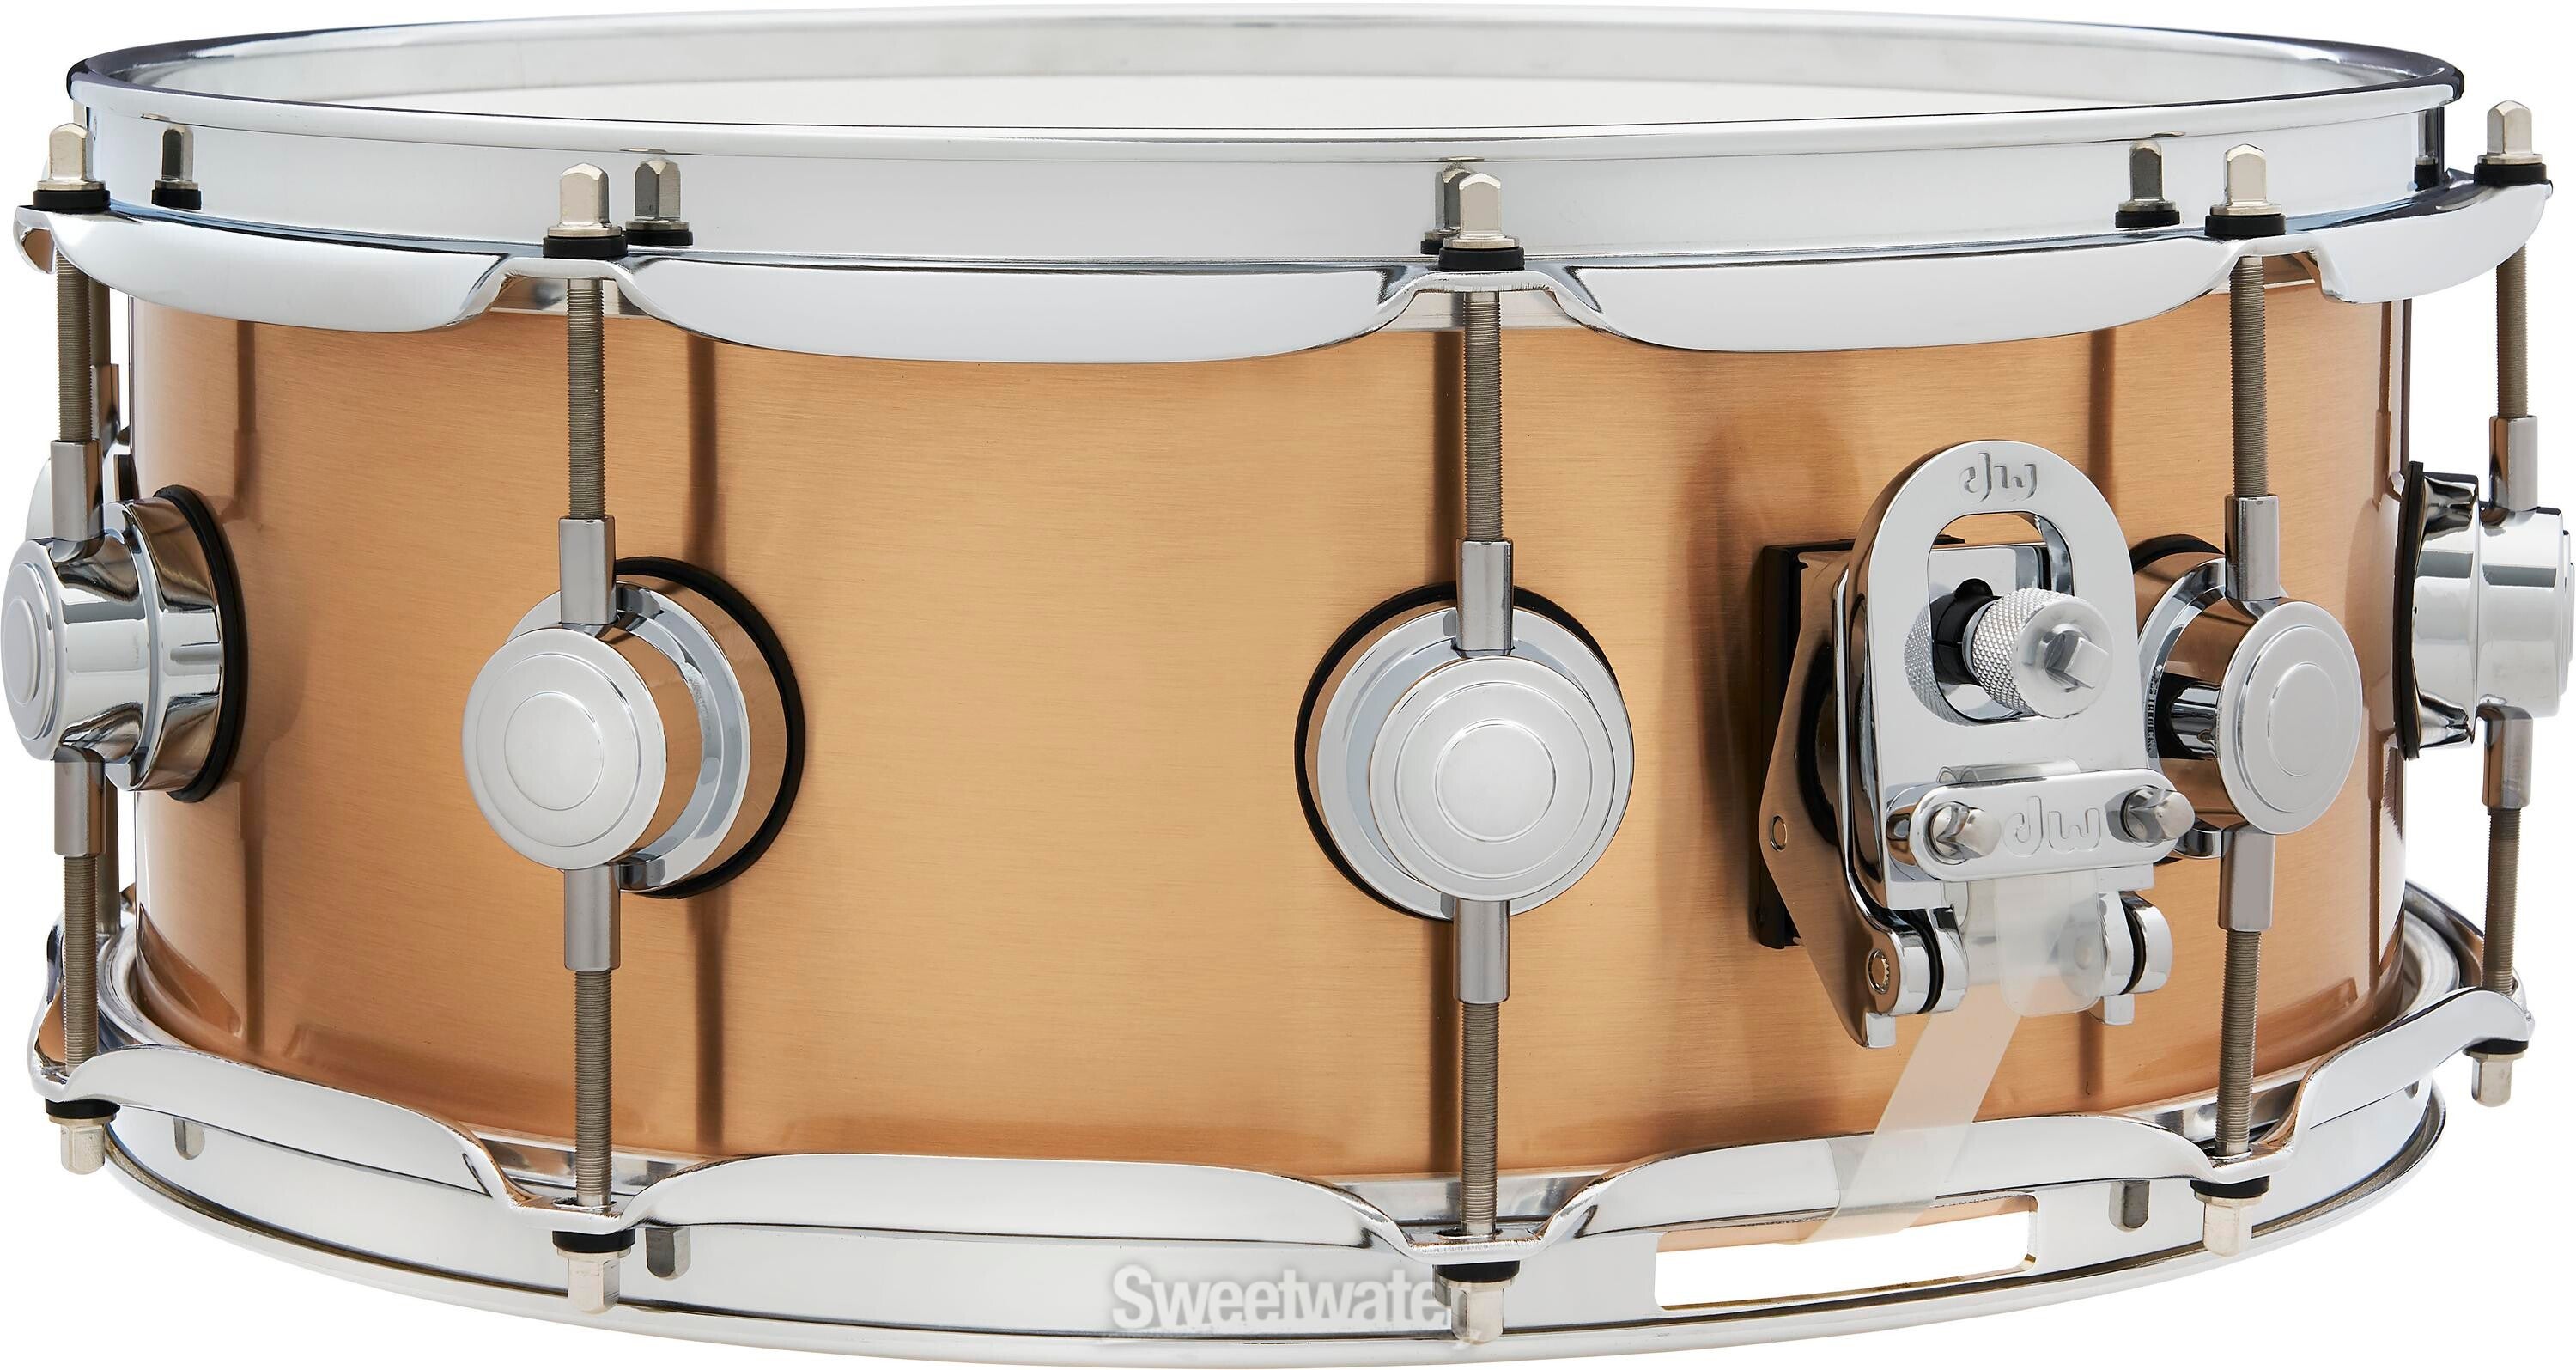 DW Collector's Series Bronze Snare Drum - 5.5 x 14 inch - Brushed Bronze